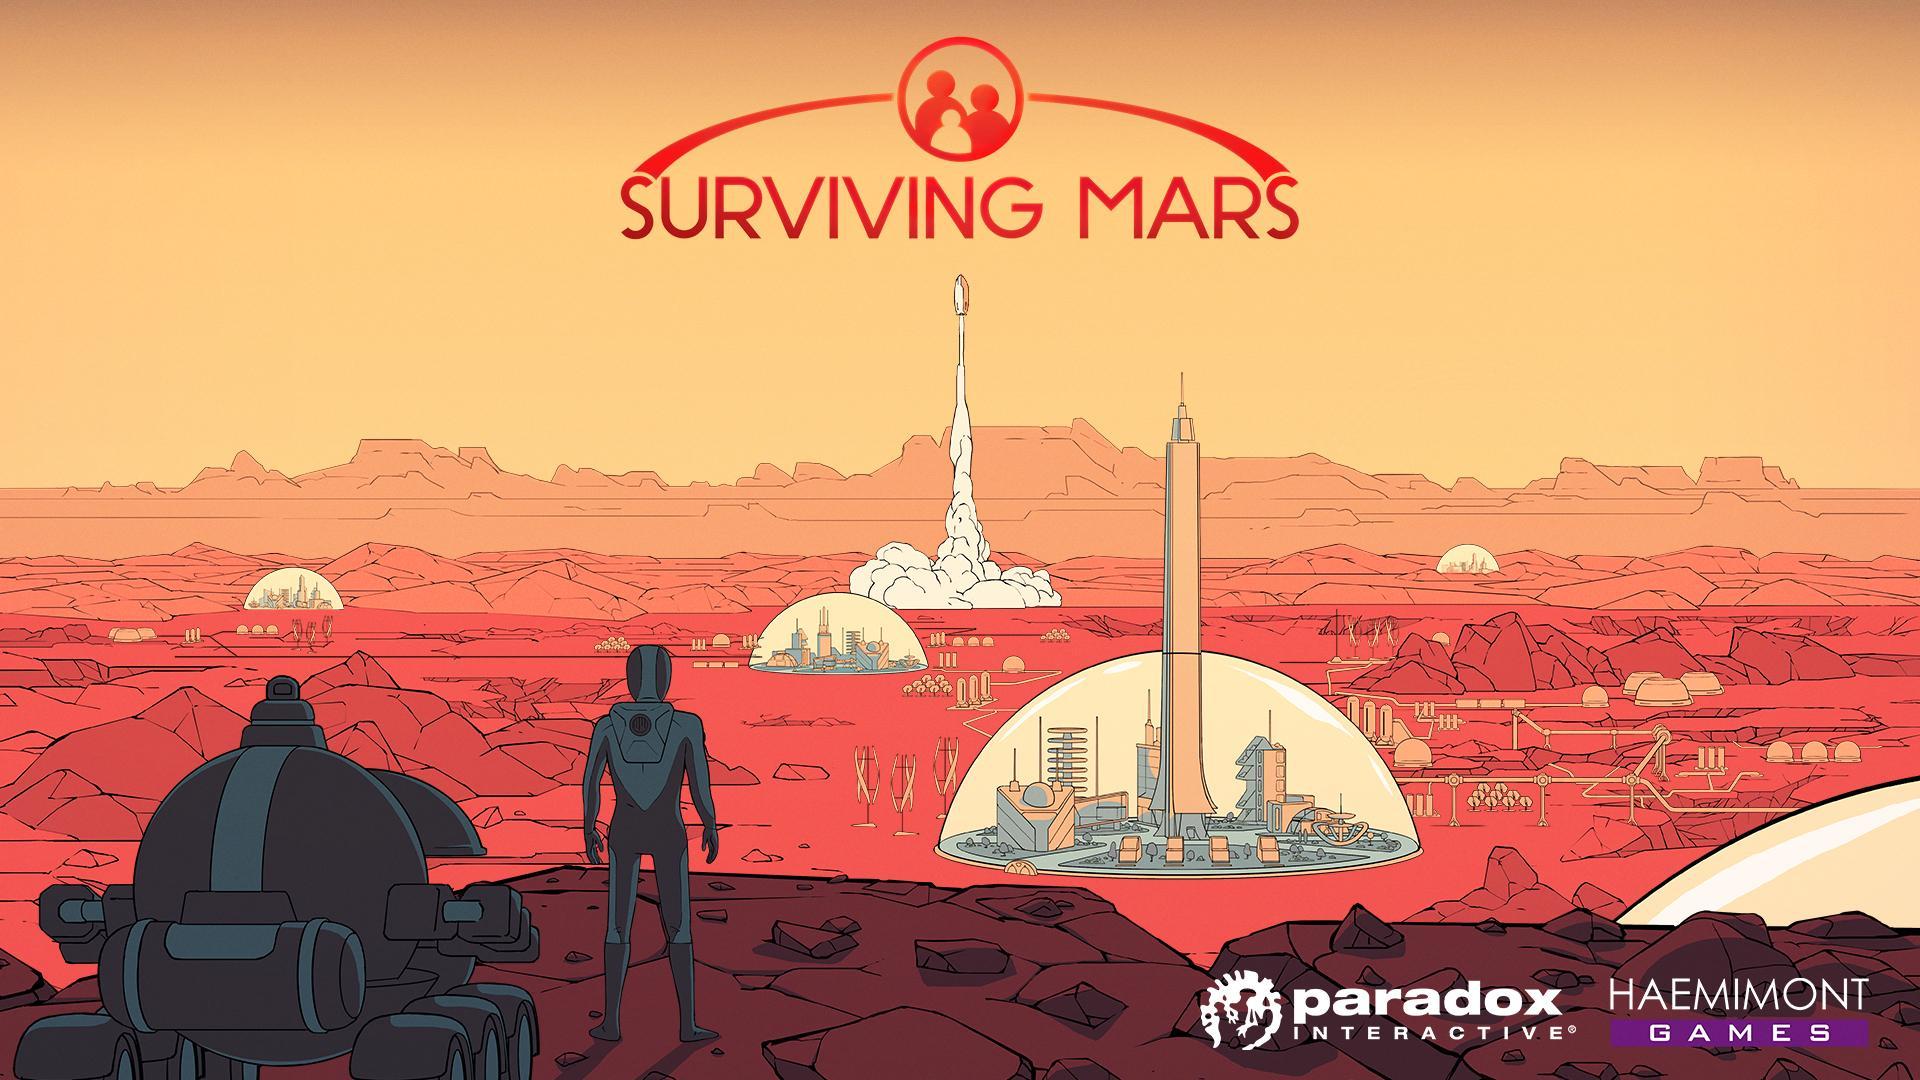 Surviving Mars' Due on March 15th for PC, PlayStation 4